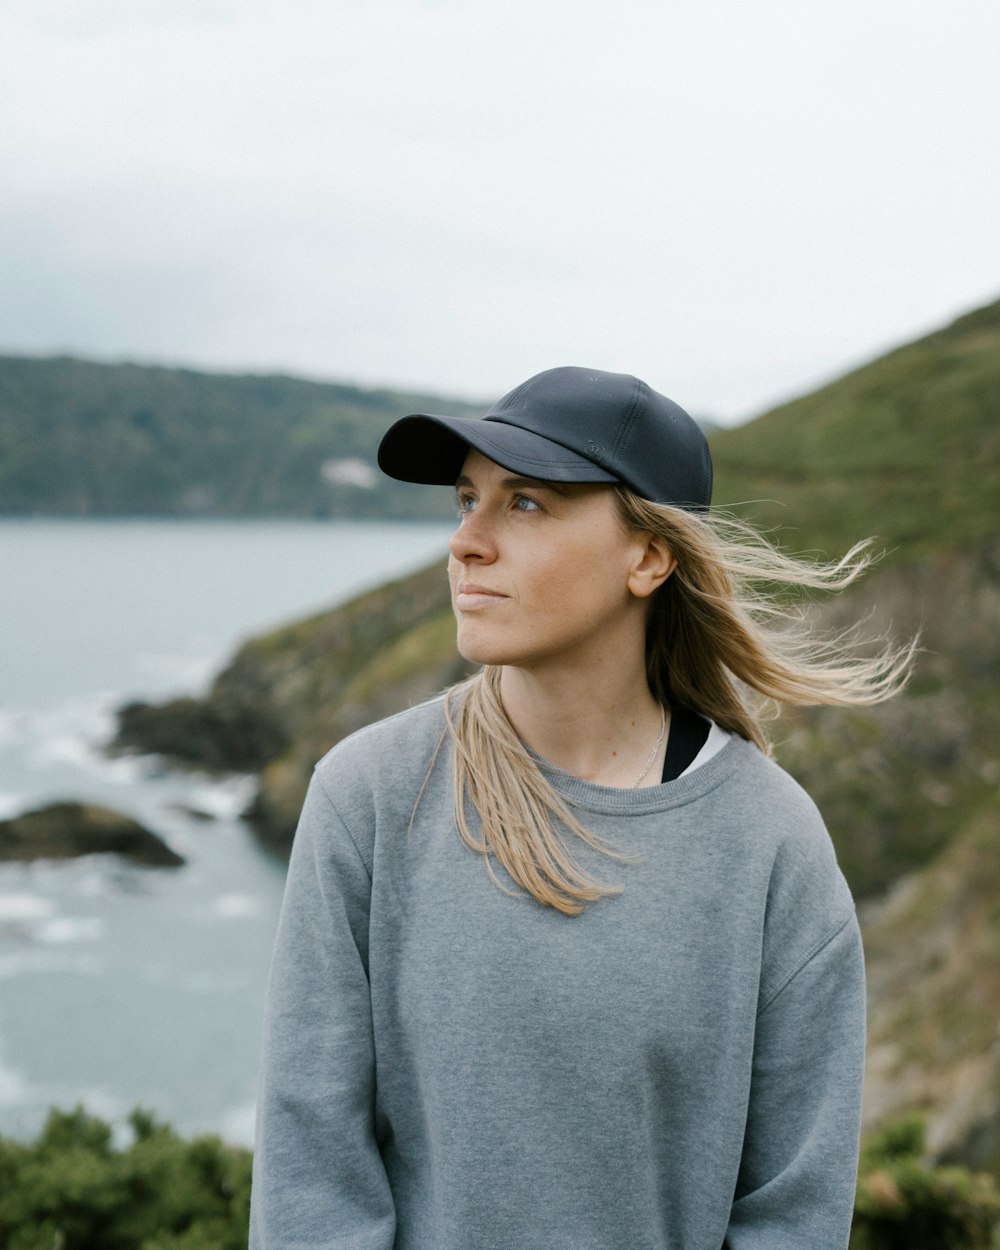 woman in gray sweater and black fedora hat standing near body of water during daytime